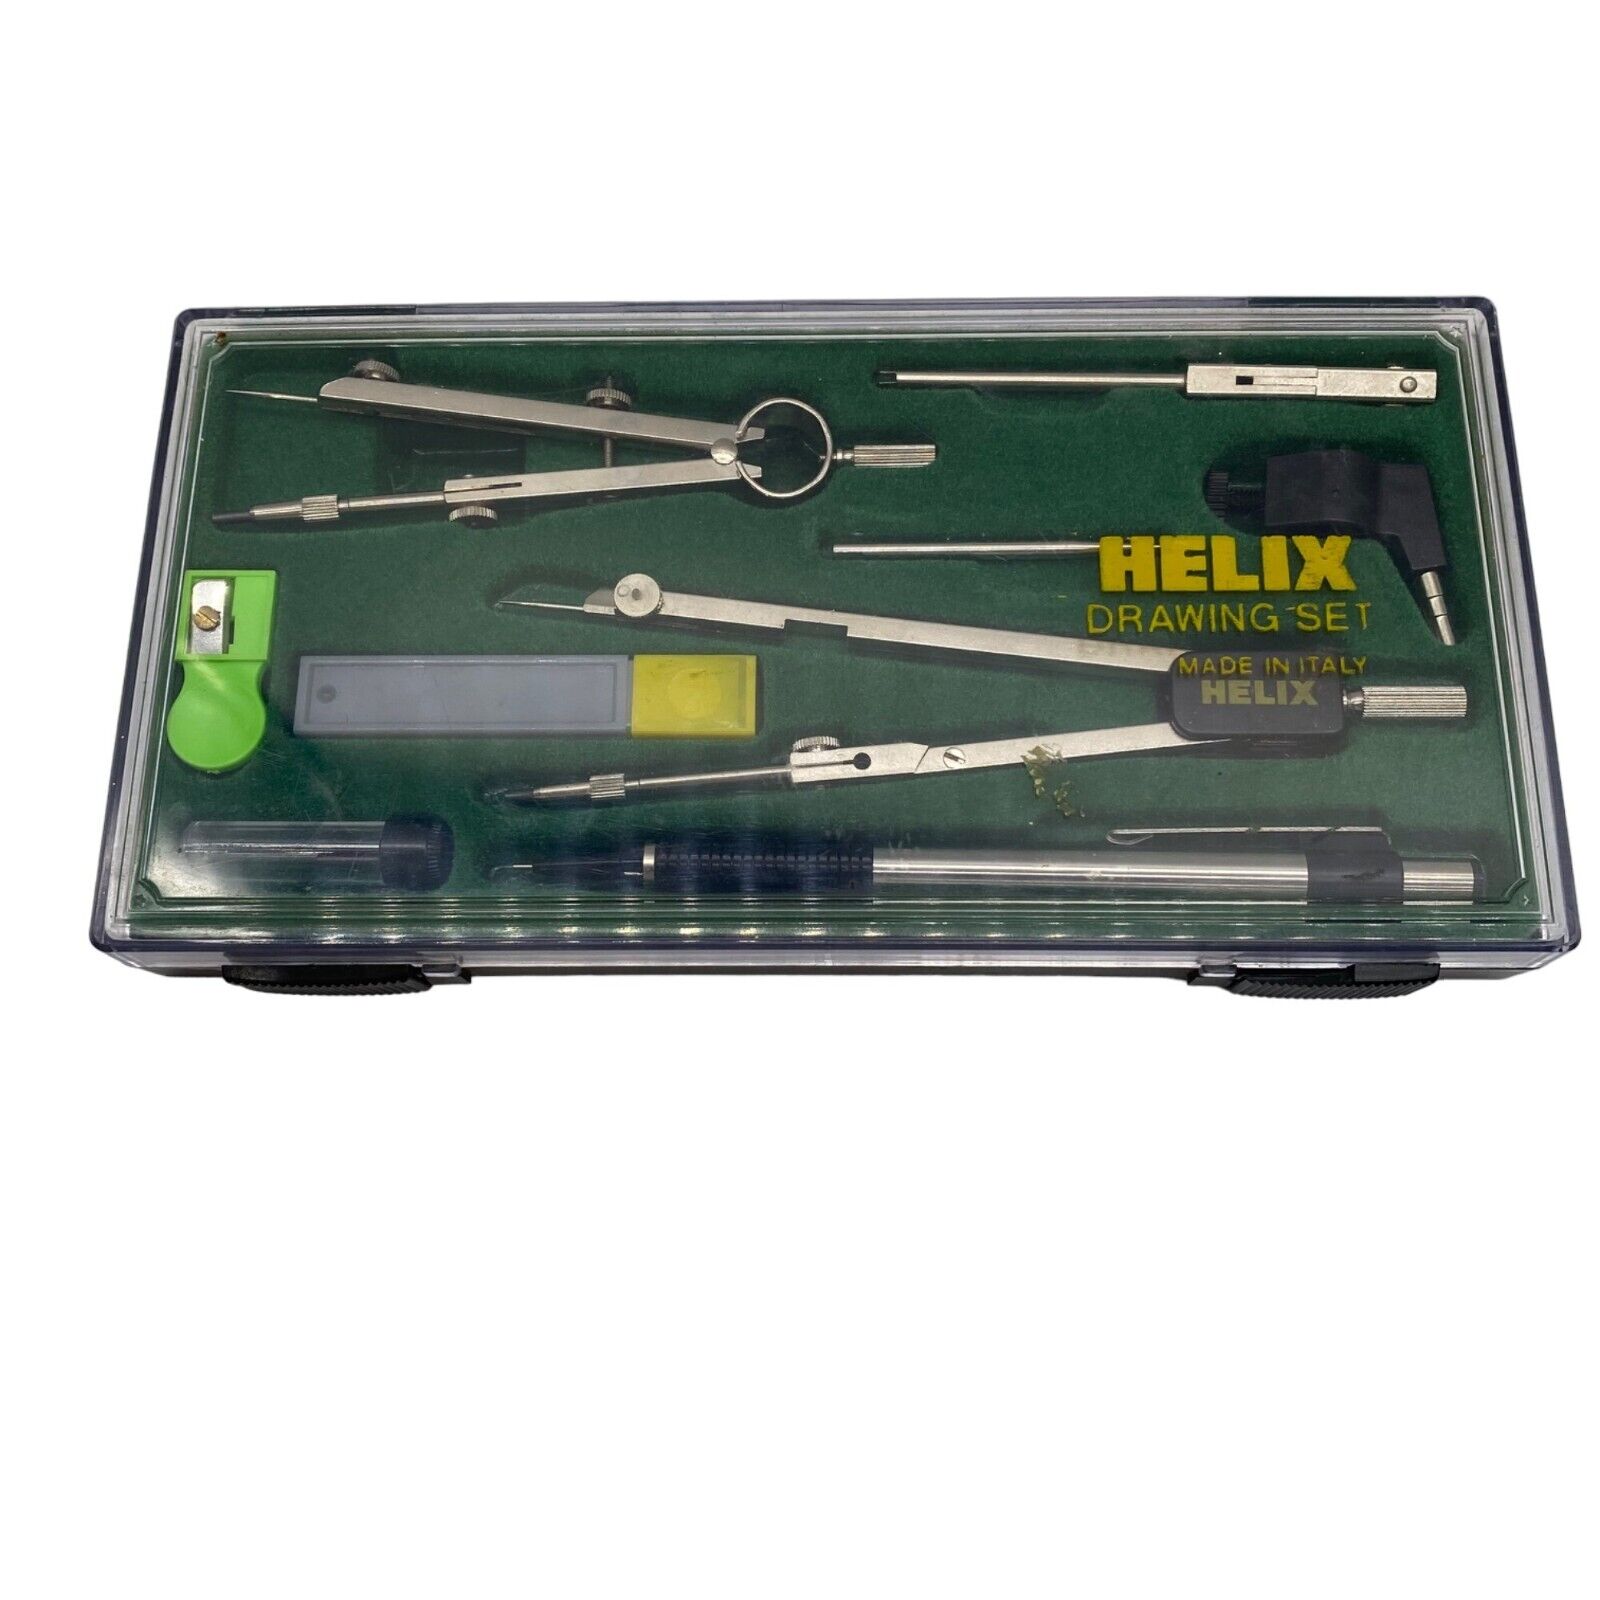 Vintage HELIX 9-Piece DRAWING SET Made In Italy Small & Large Compasses w/ Case